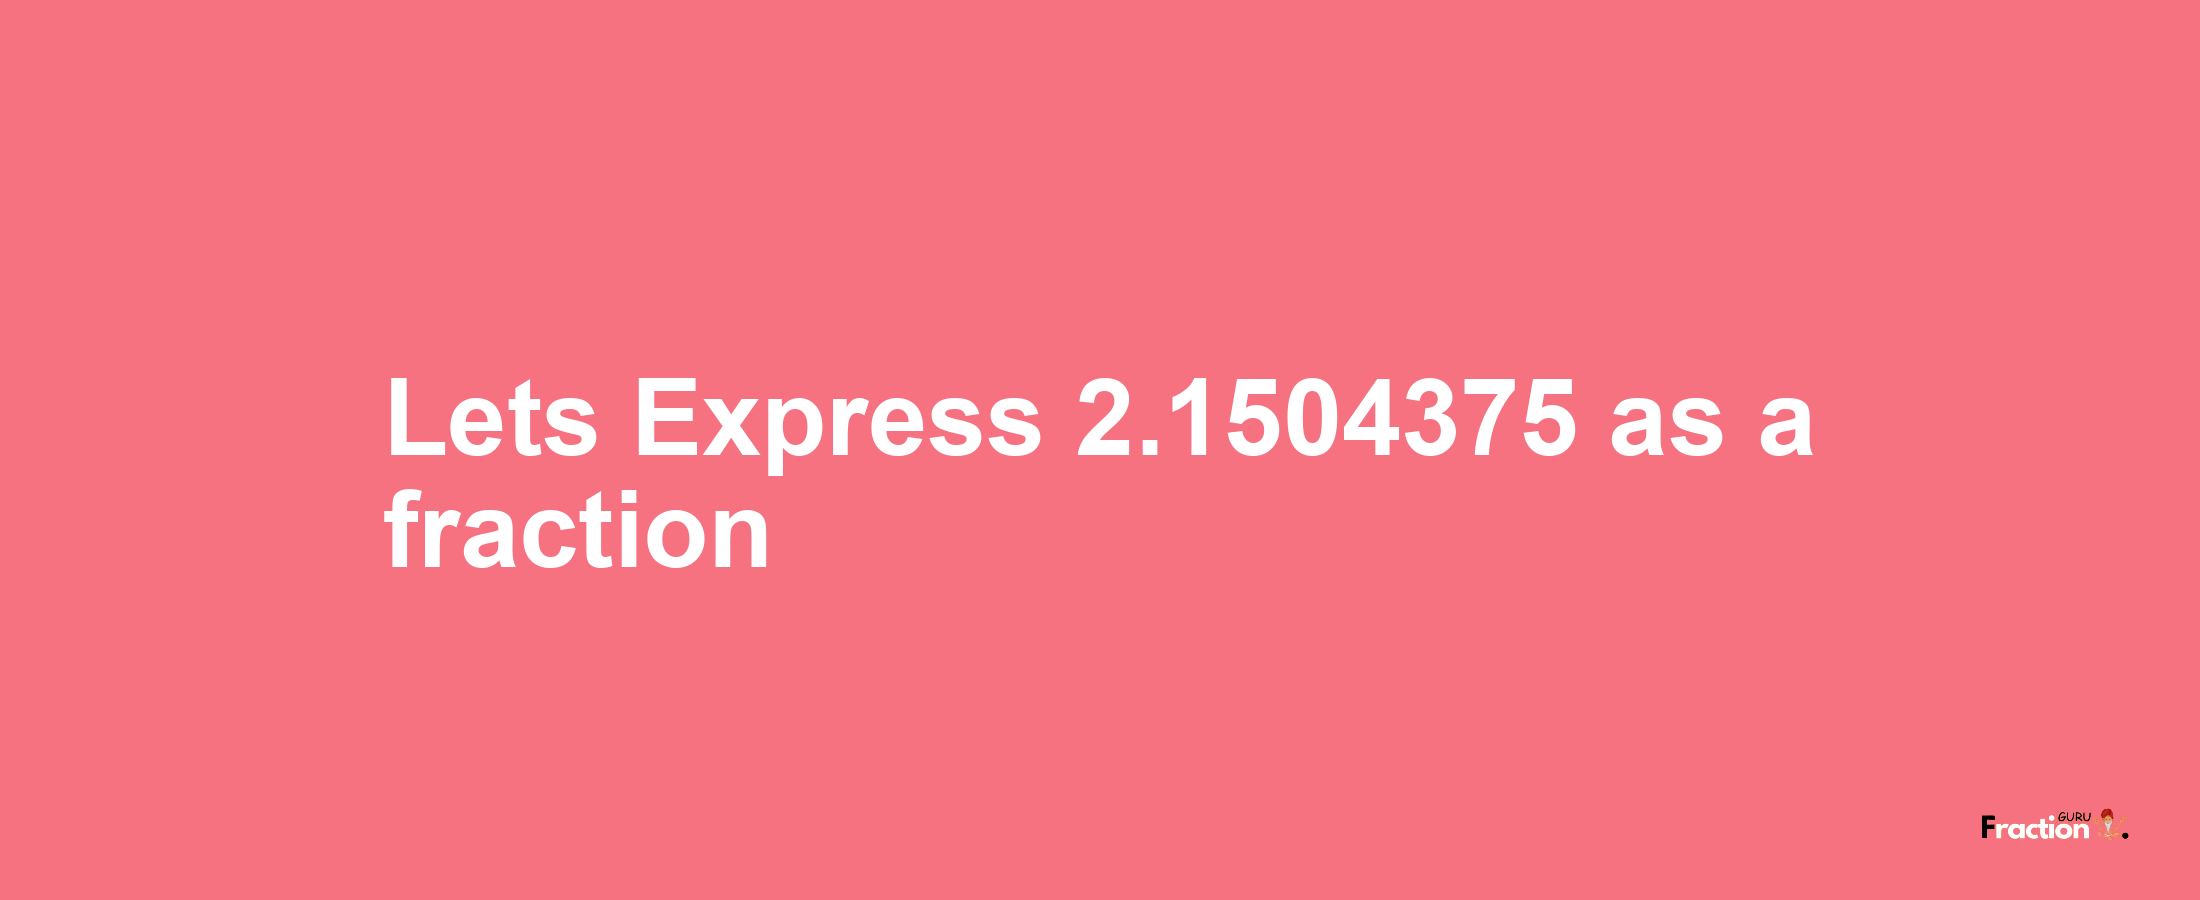 Lets Express 2.1504375 as afraction